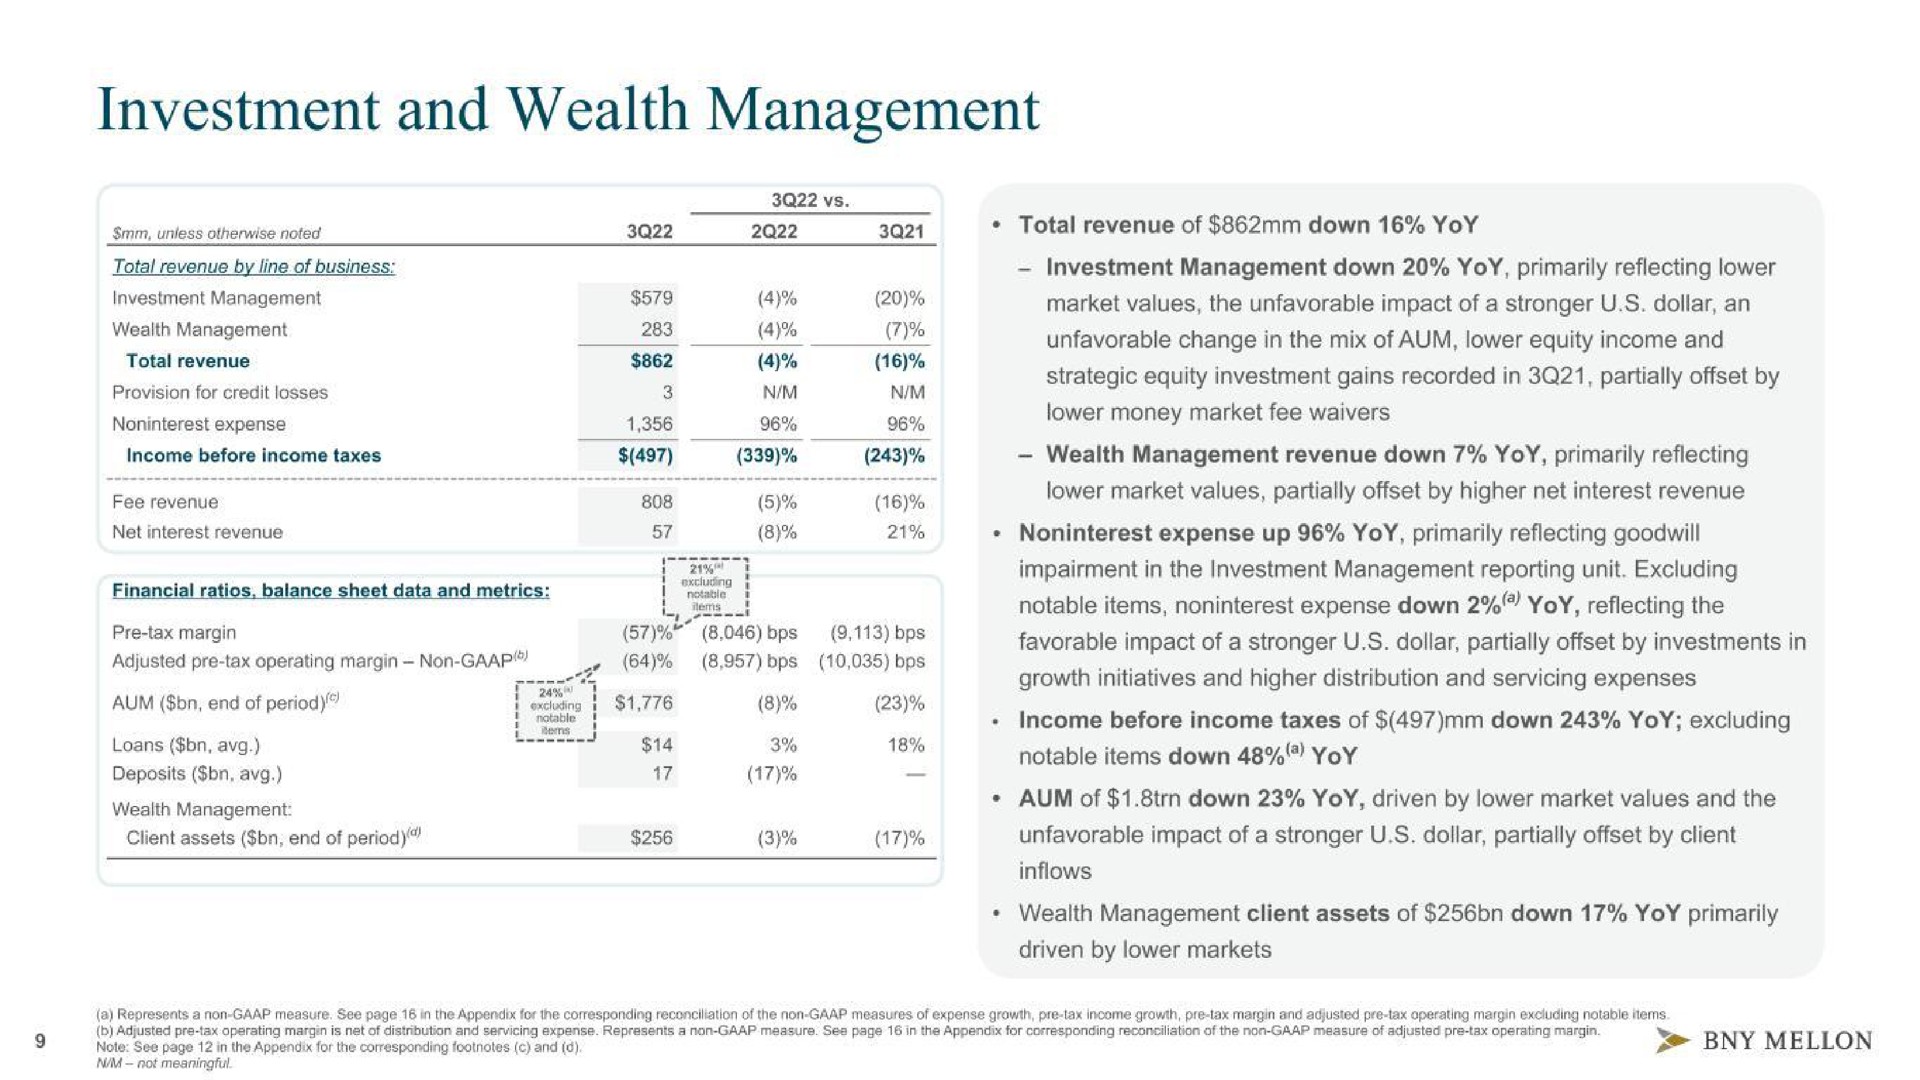 investment and wealth management loans a notable items down yoy | BNY Mellon